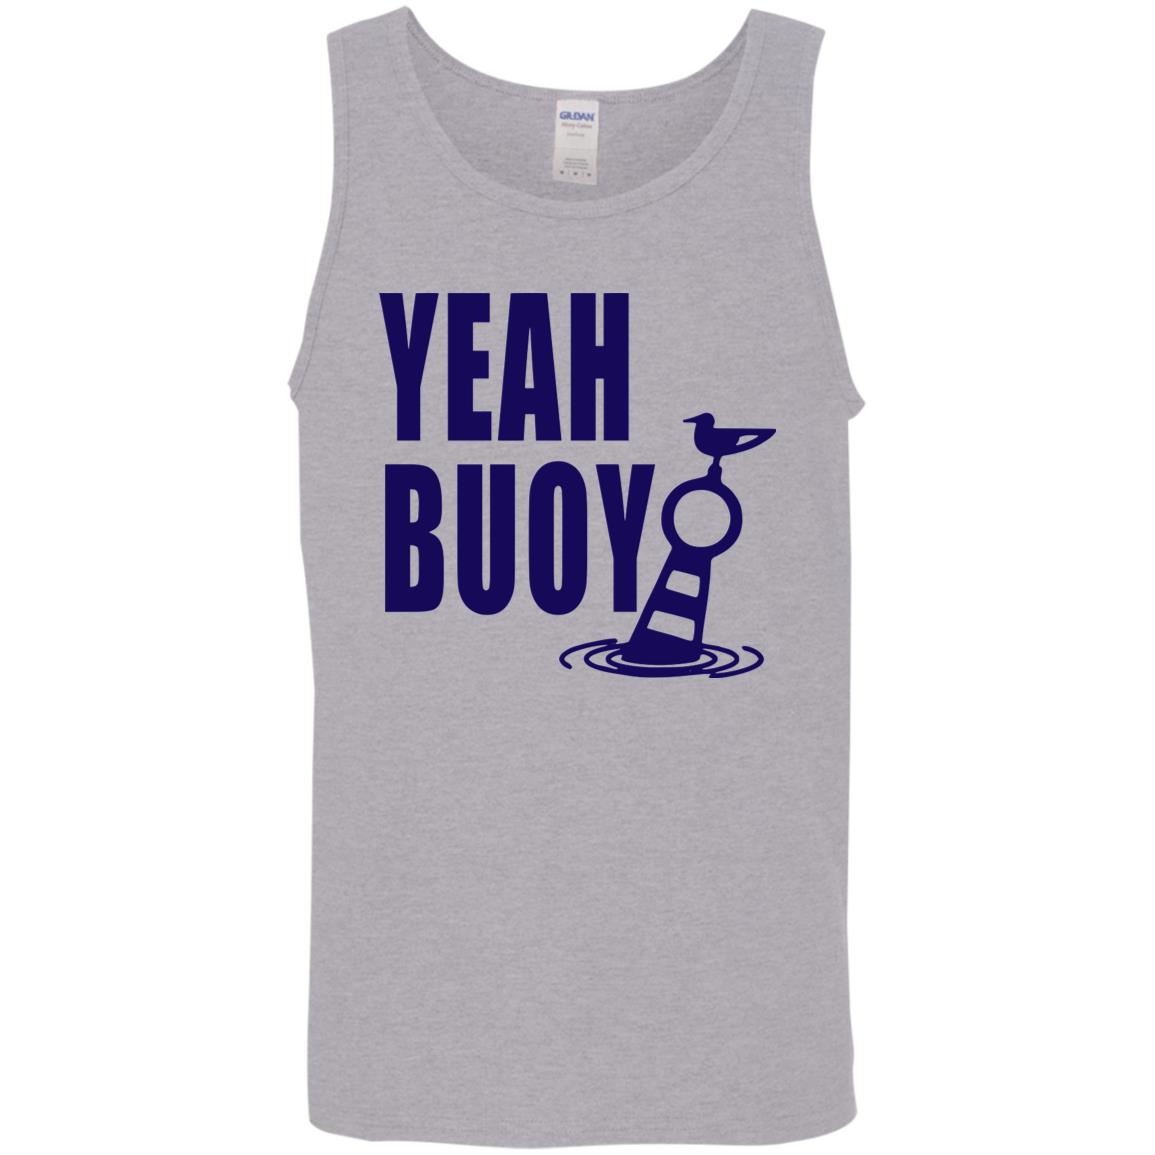 ***2 SIDED***  HRCL FL - Navy Yeah Buoy 2 Sided G520 Cotton Tank Top 5.3 oz.